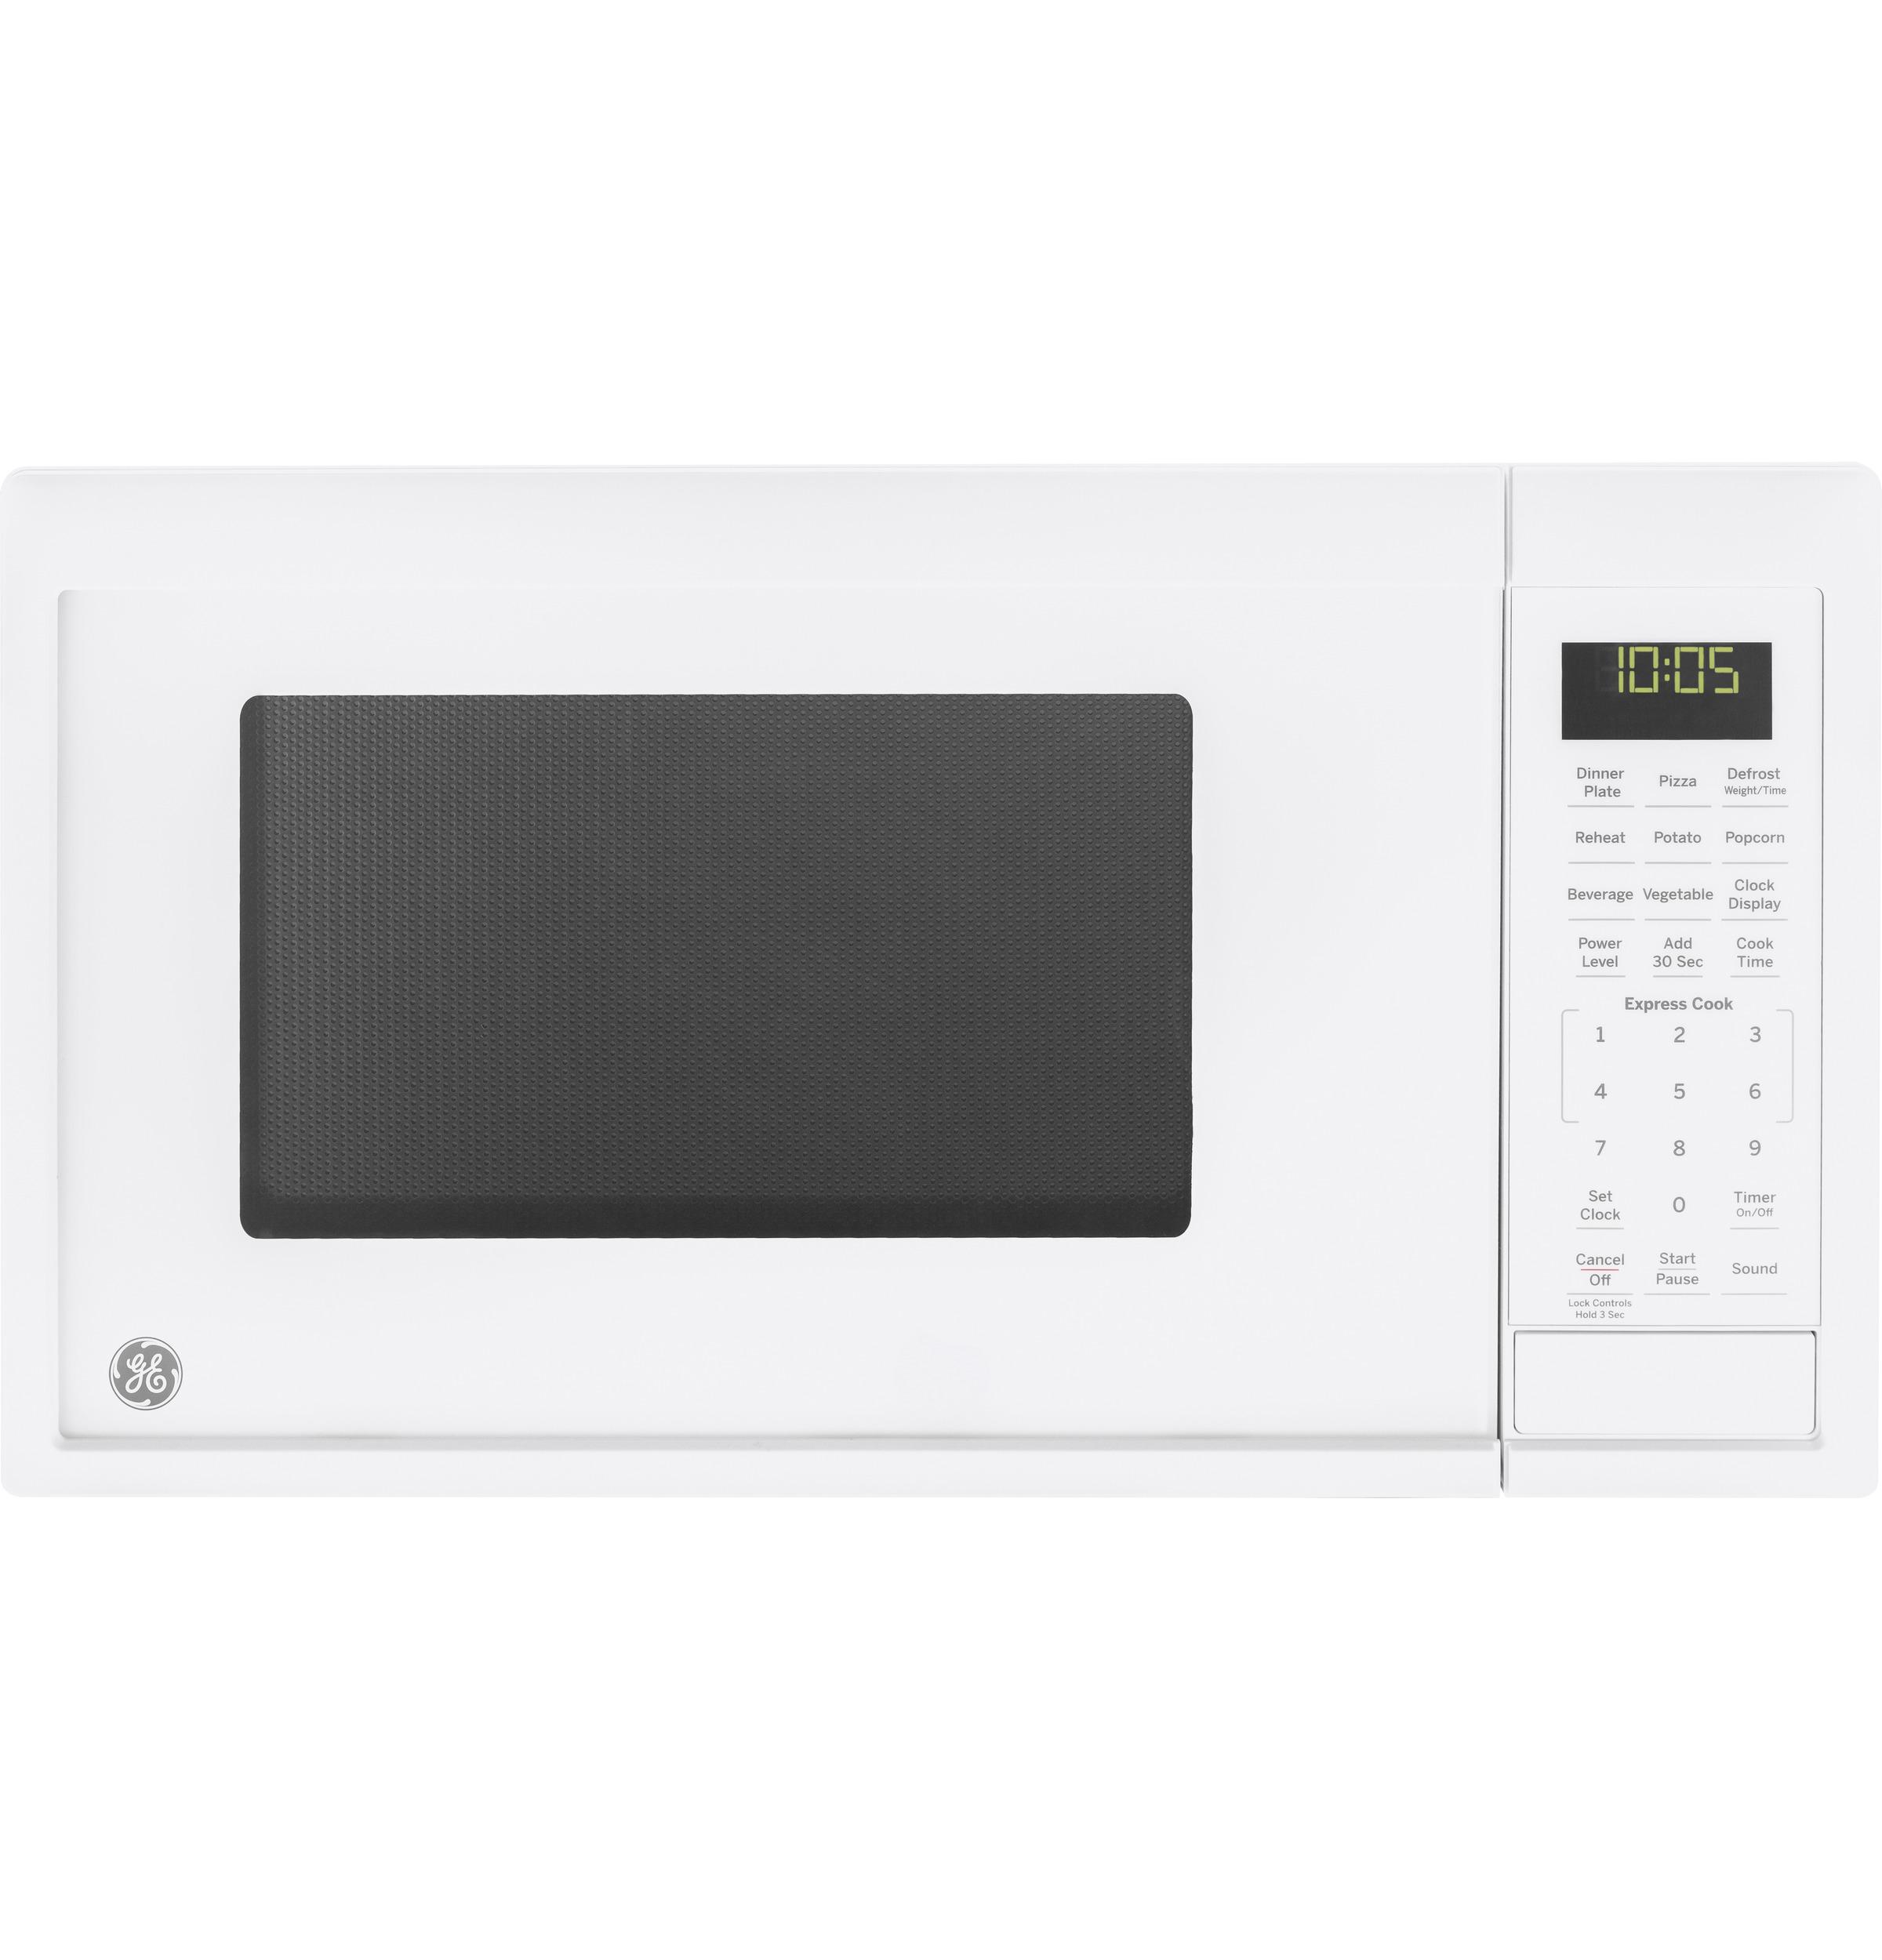 GE JES1095SMSS 0.9 Cu. ft. Countertop Microwave Oven, Stainless Steel